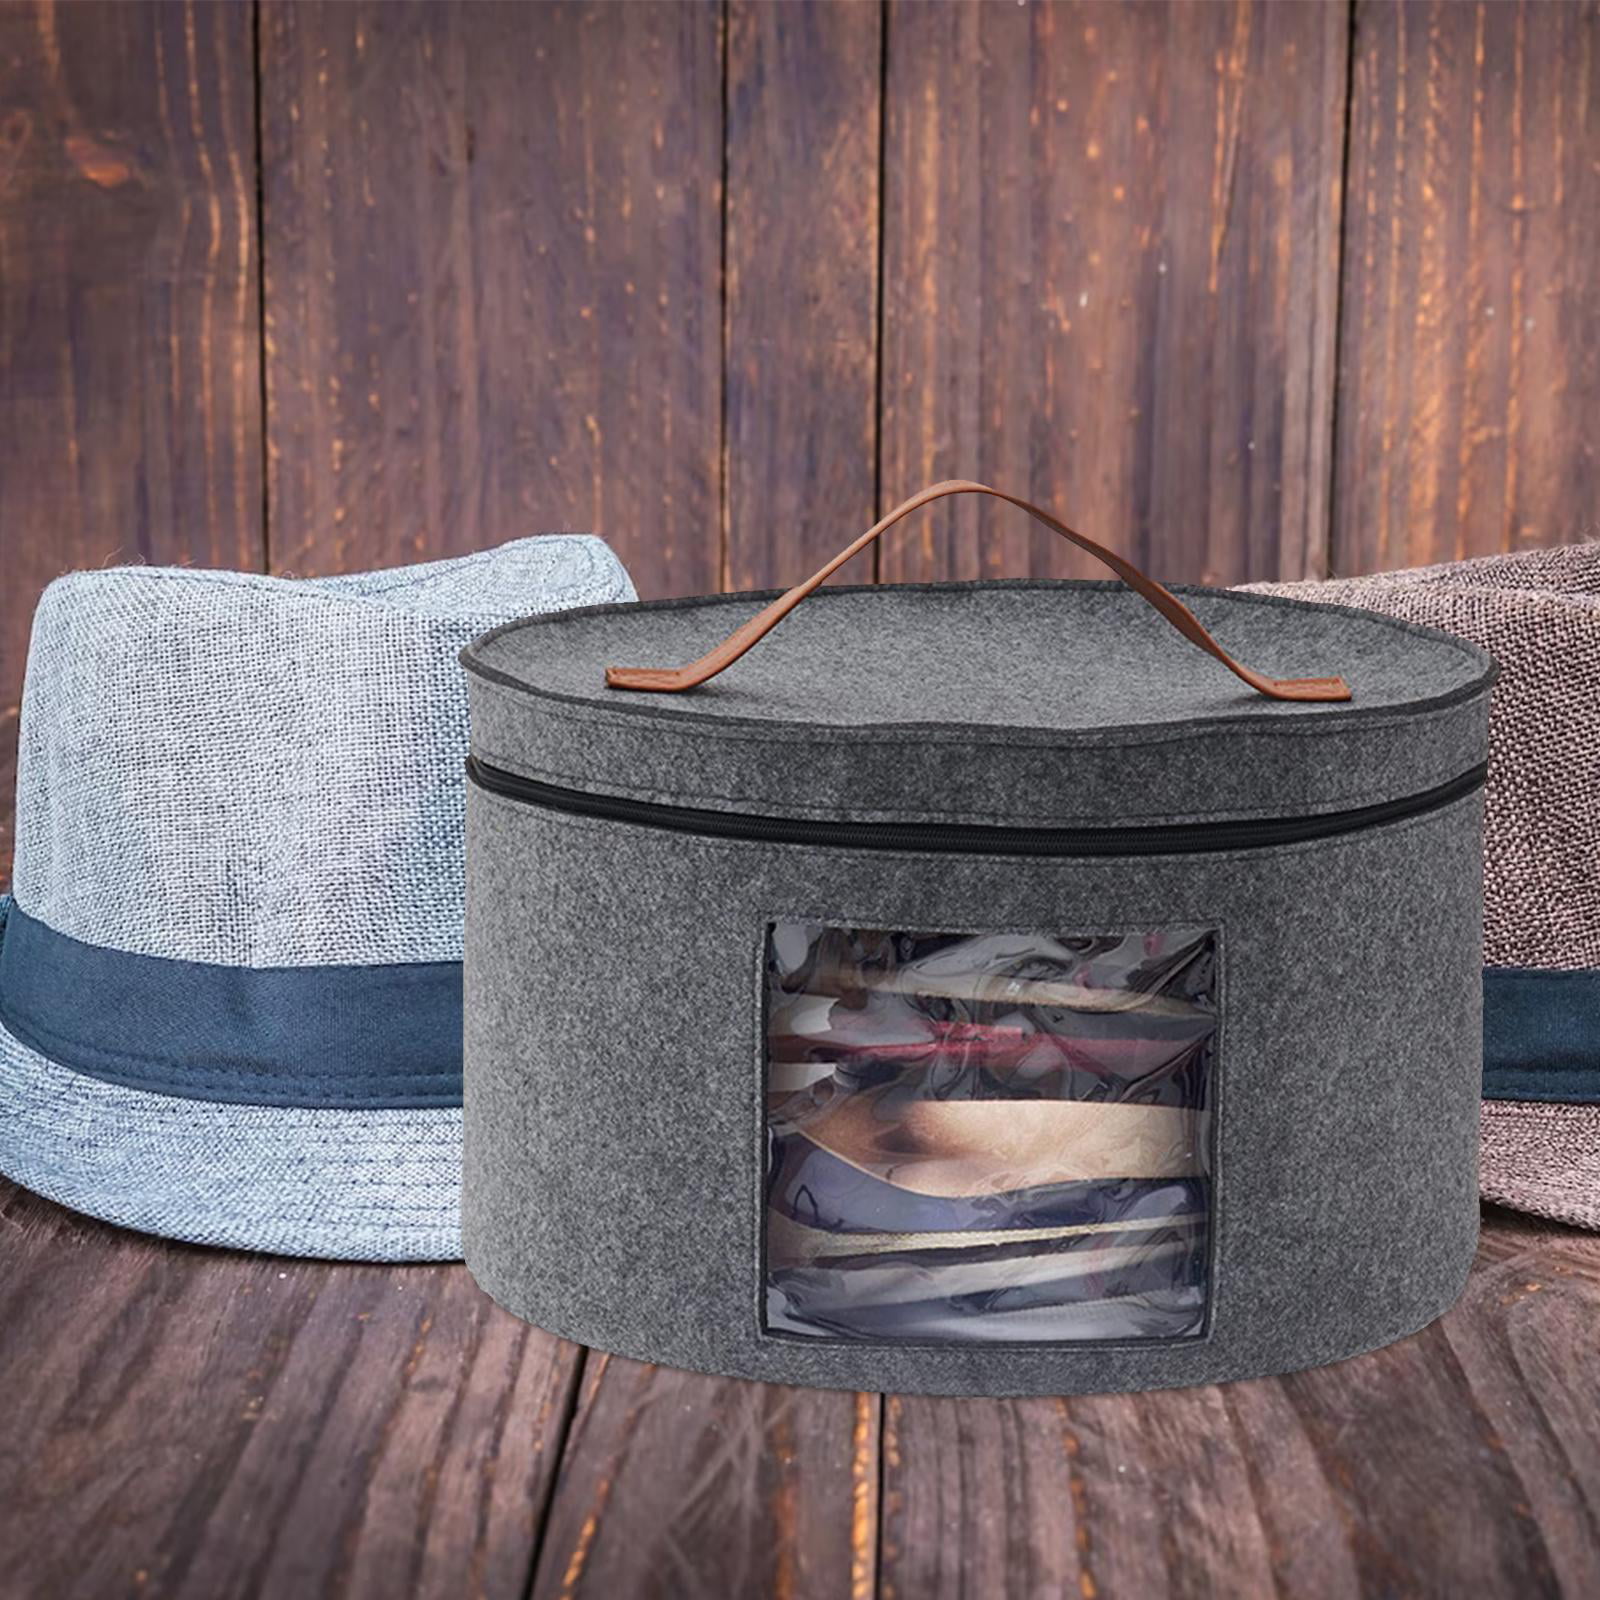 Hat Box,Hat Storage Box,Stackable Round Brim Hats Organizer Bag Container  for Closet,Travel Hat Boxes for Women&Men,Collapsible Cowboy Hat  Organizer,Stuffed Animal Toy Storage,Foldable Round Travel Cap Boxes with  Dustproof Lid